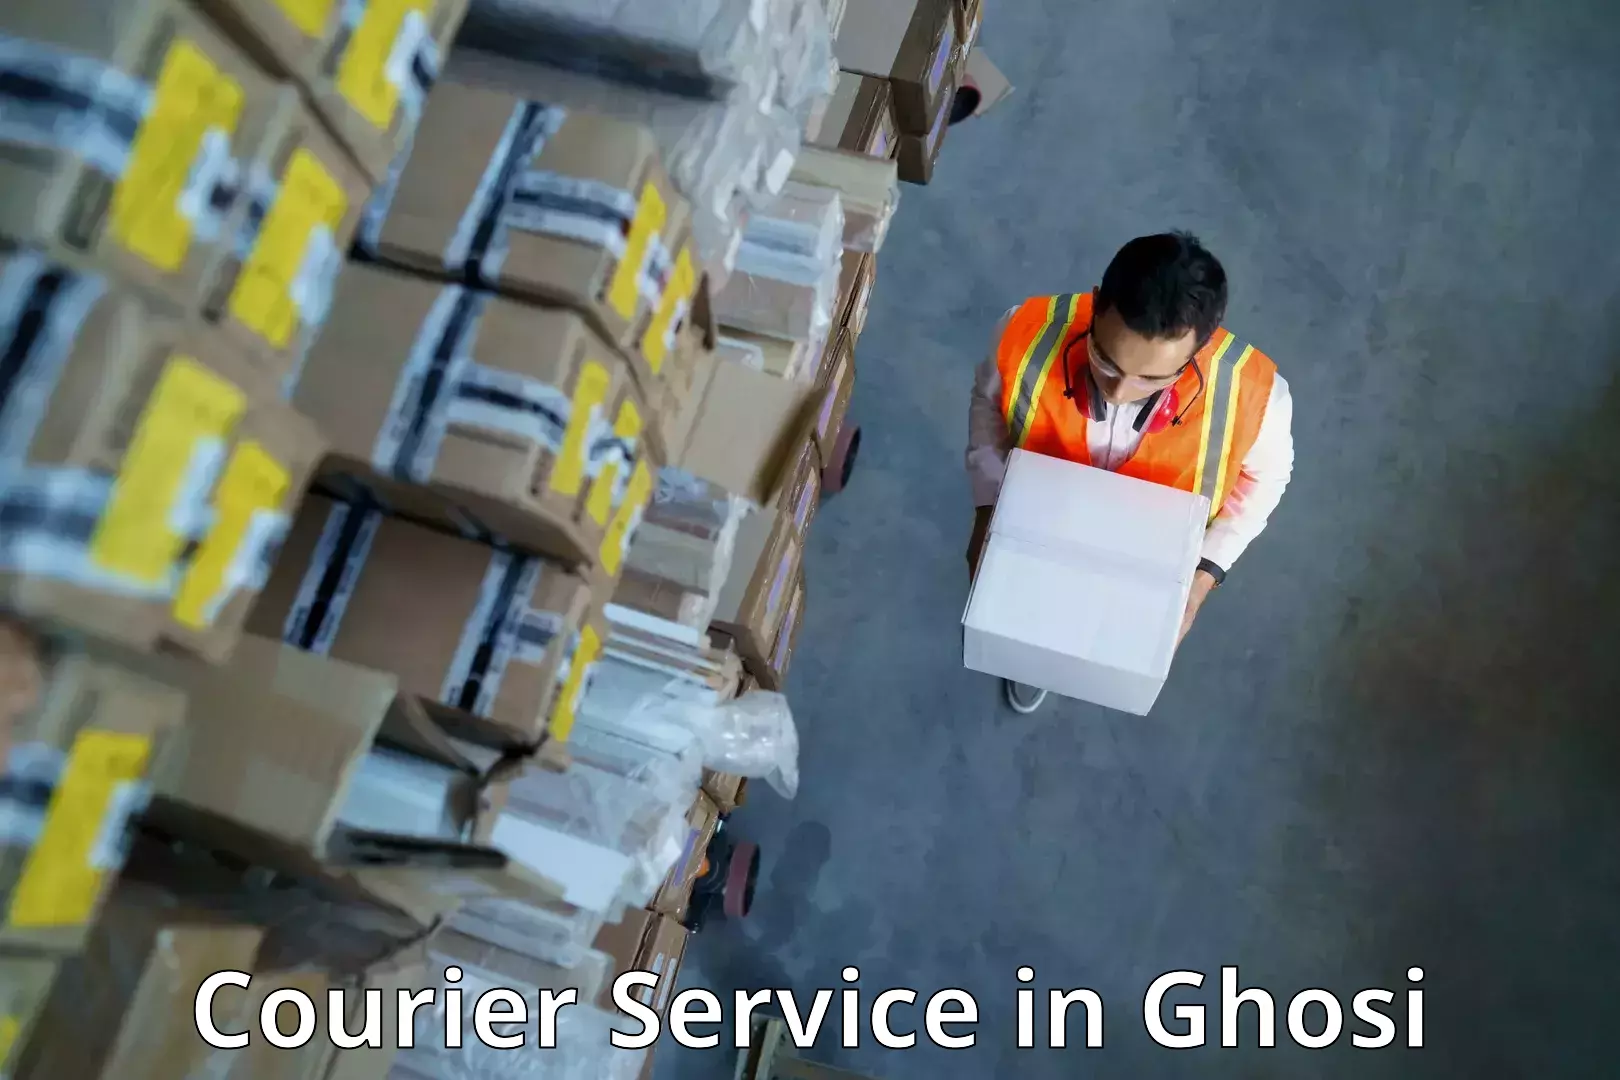 Parcel handling and care in Ghosi